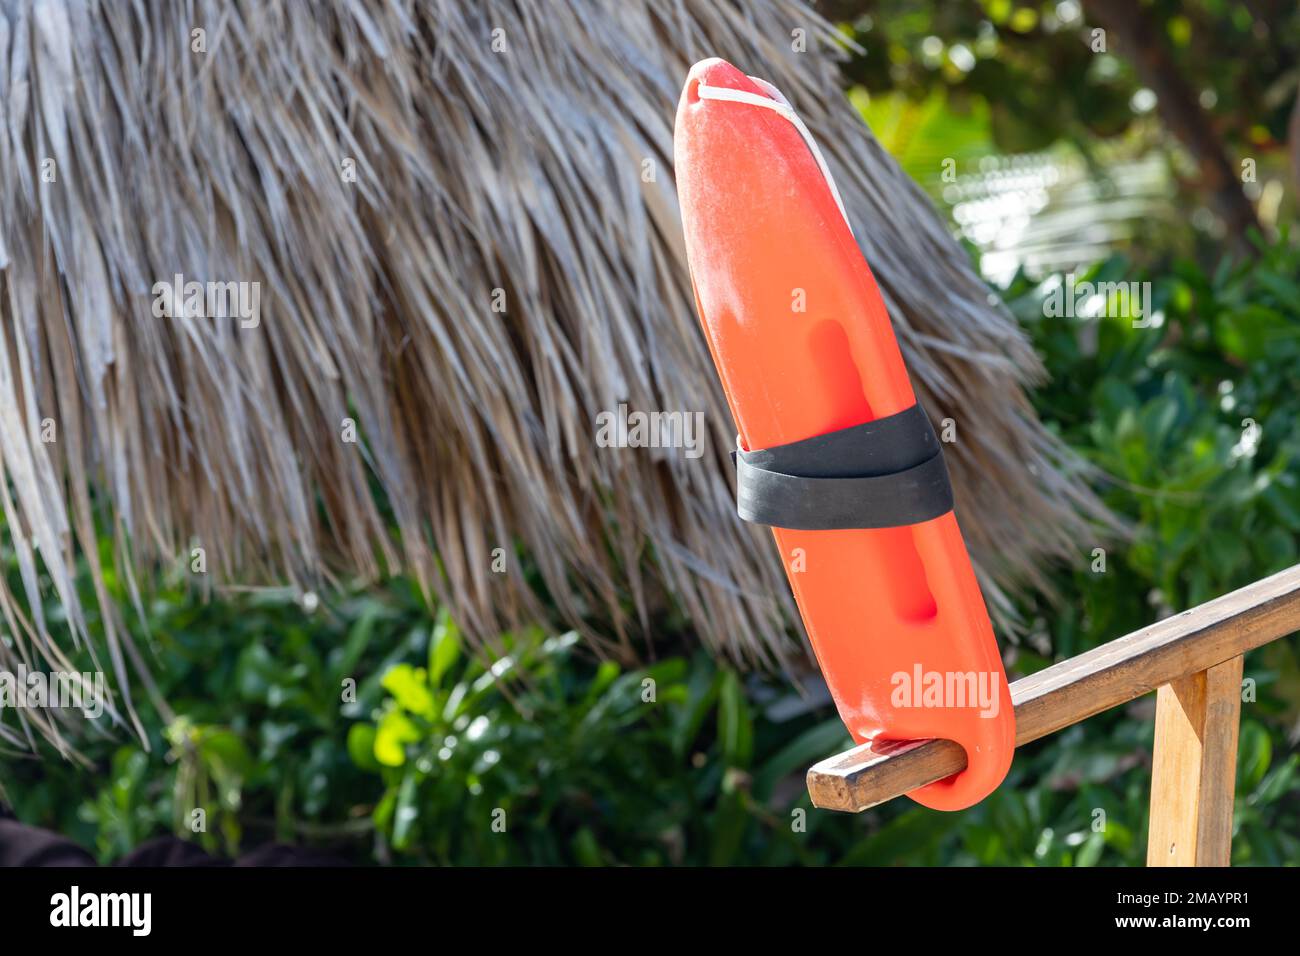 Swimming area safety equipment, red lifeguard rescue can Stock Photo